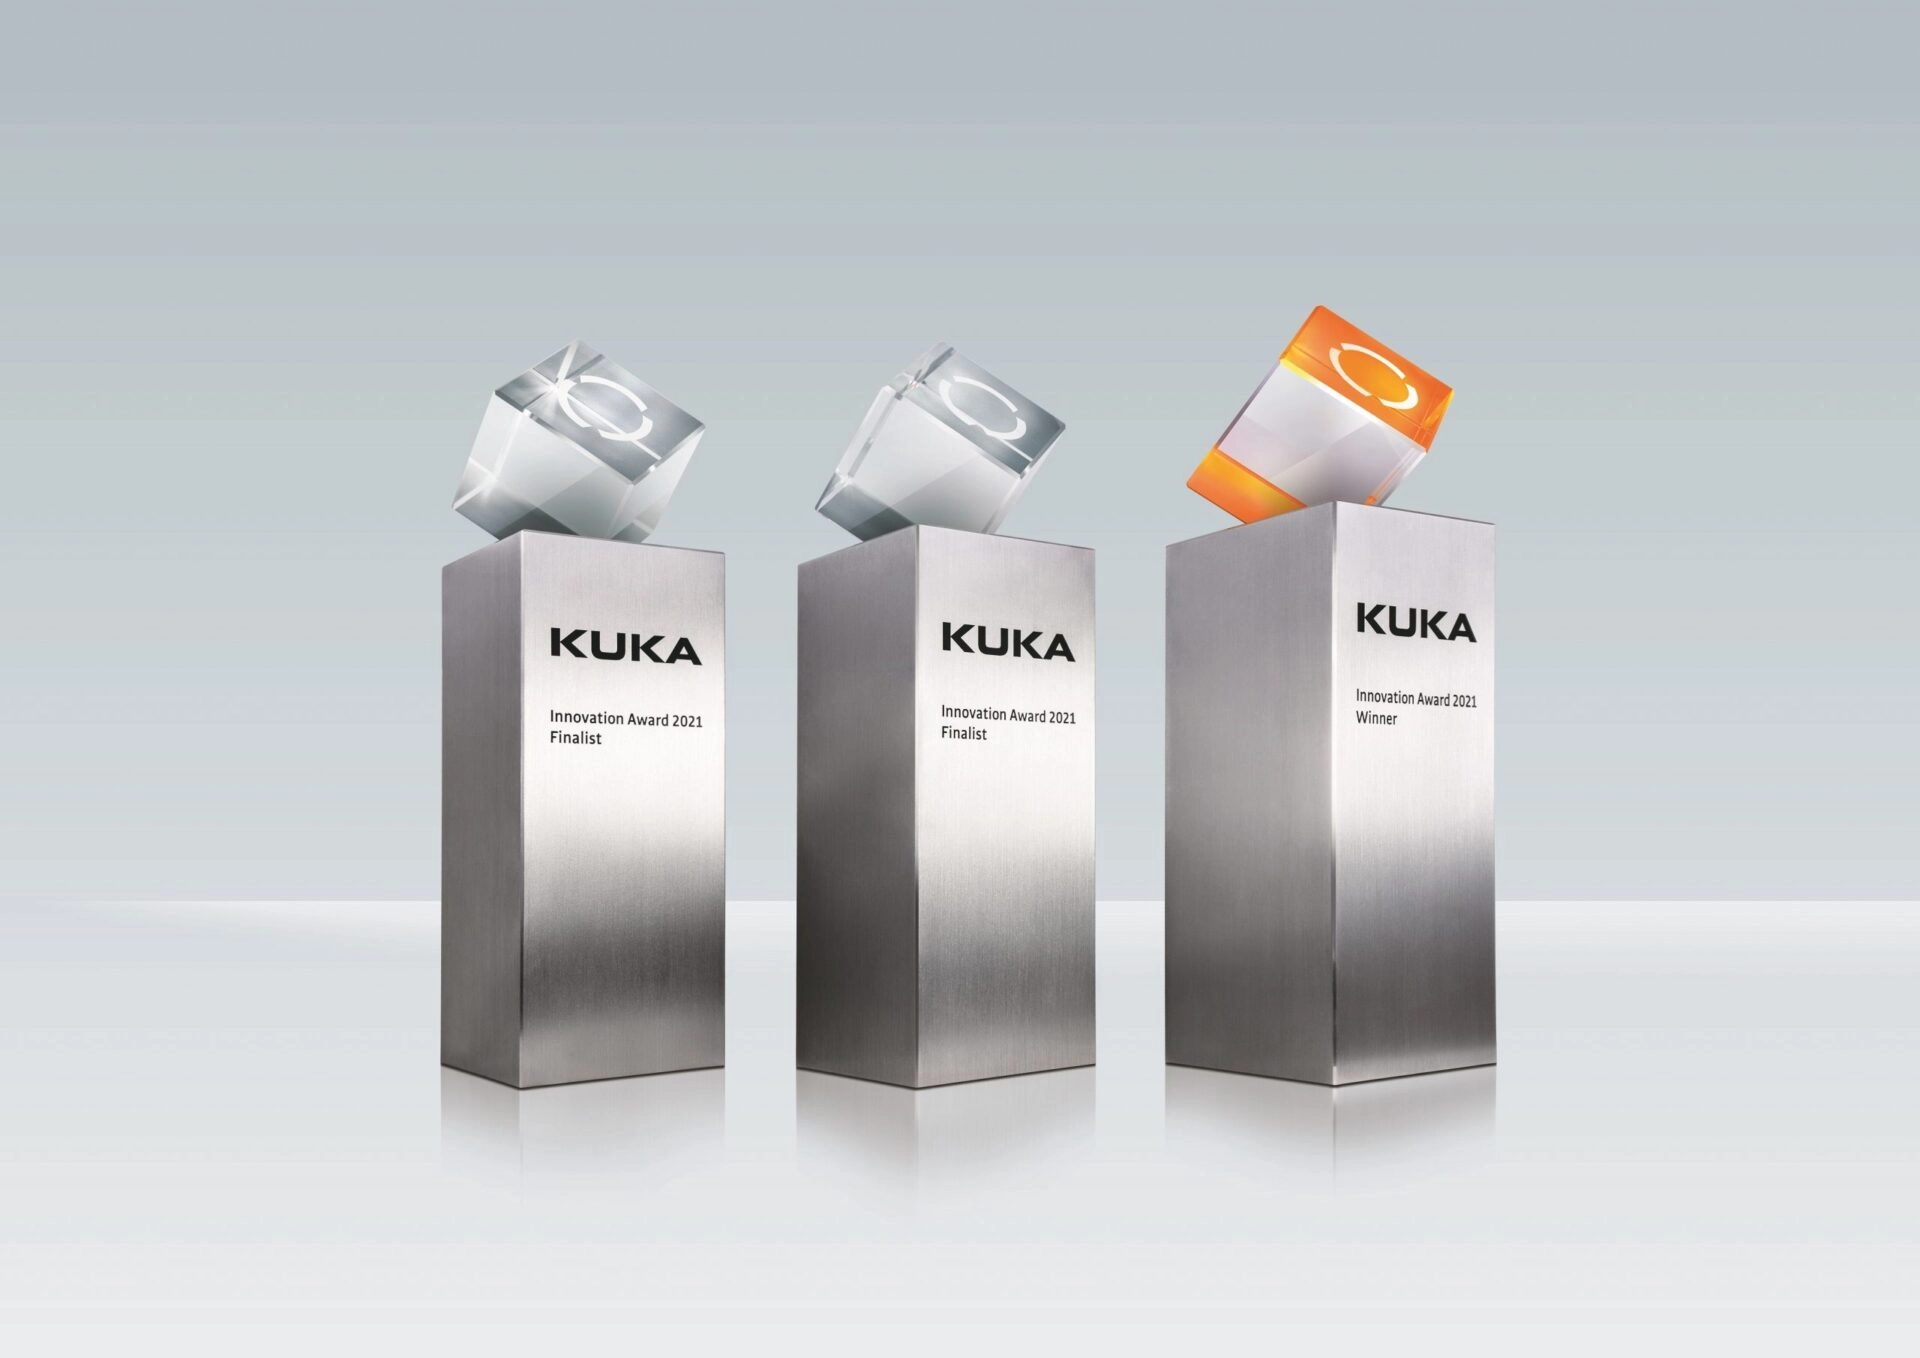 Artificial Intelligence Challenge: These are the finalists for the 2021 KUKA Innovation Award